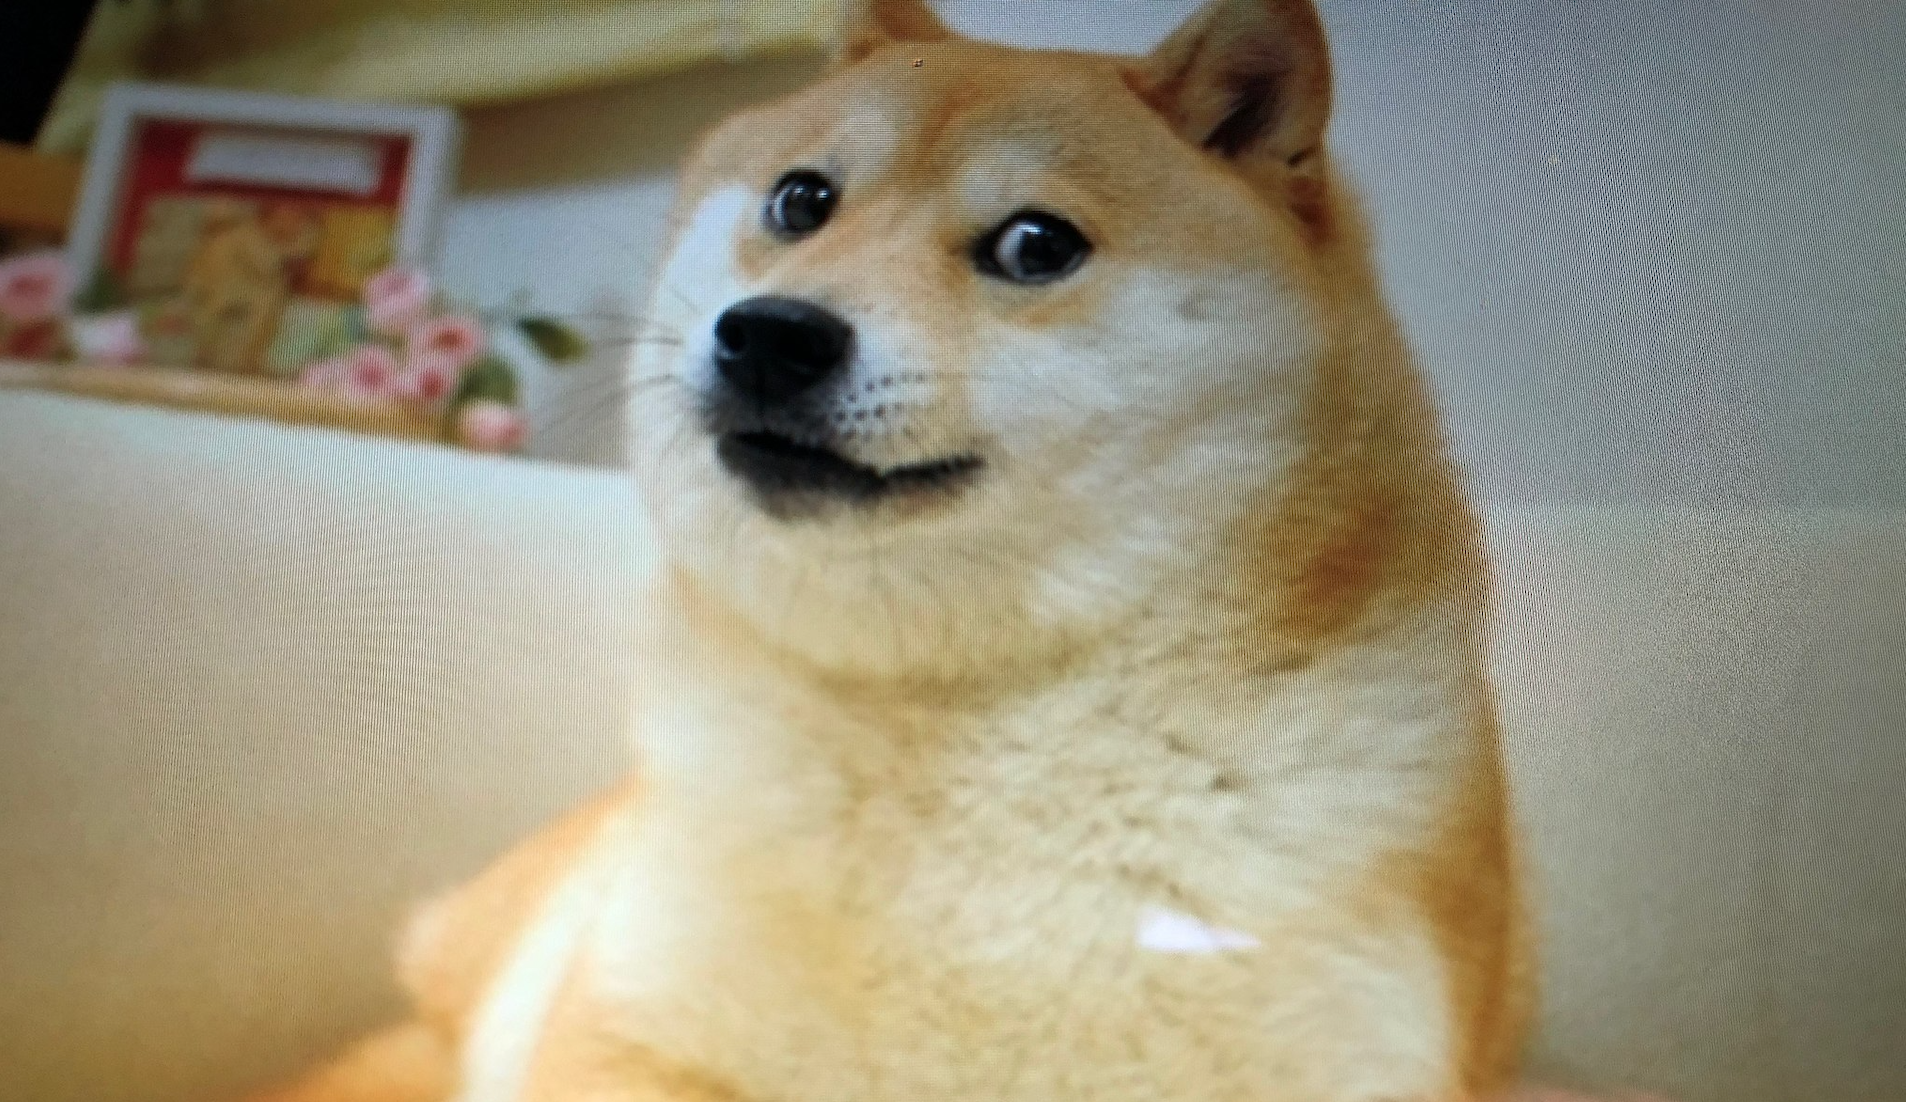 Why Is Kronos Advance Tech Ditching First Bitcoin In Favor of Dogecoin Cash?